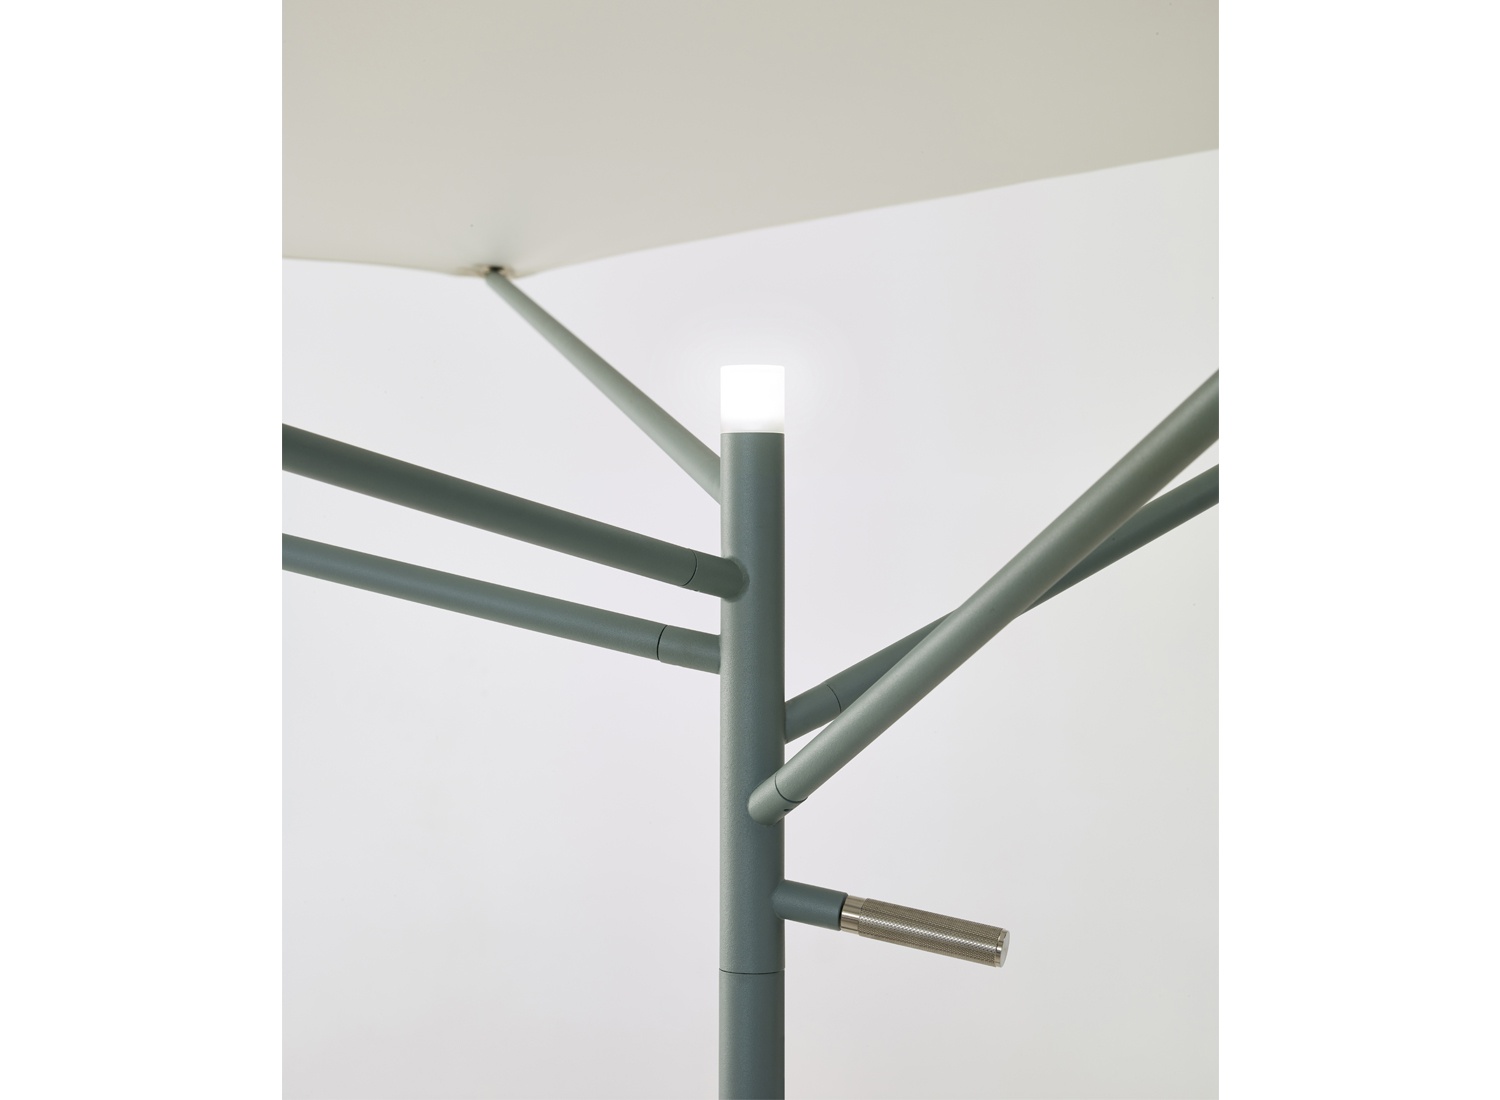 detailed view of LED light integrated into parasol frame